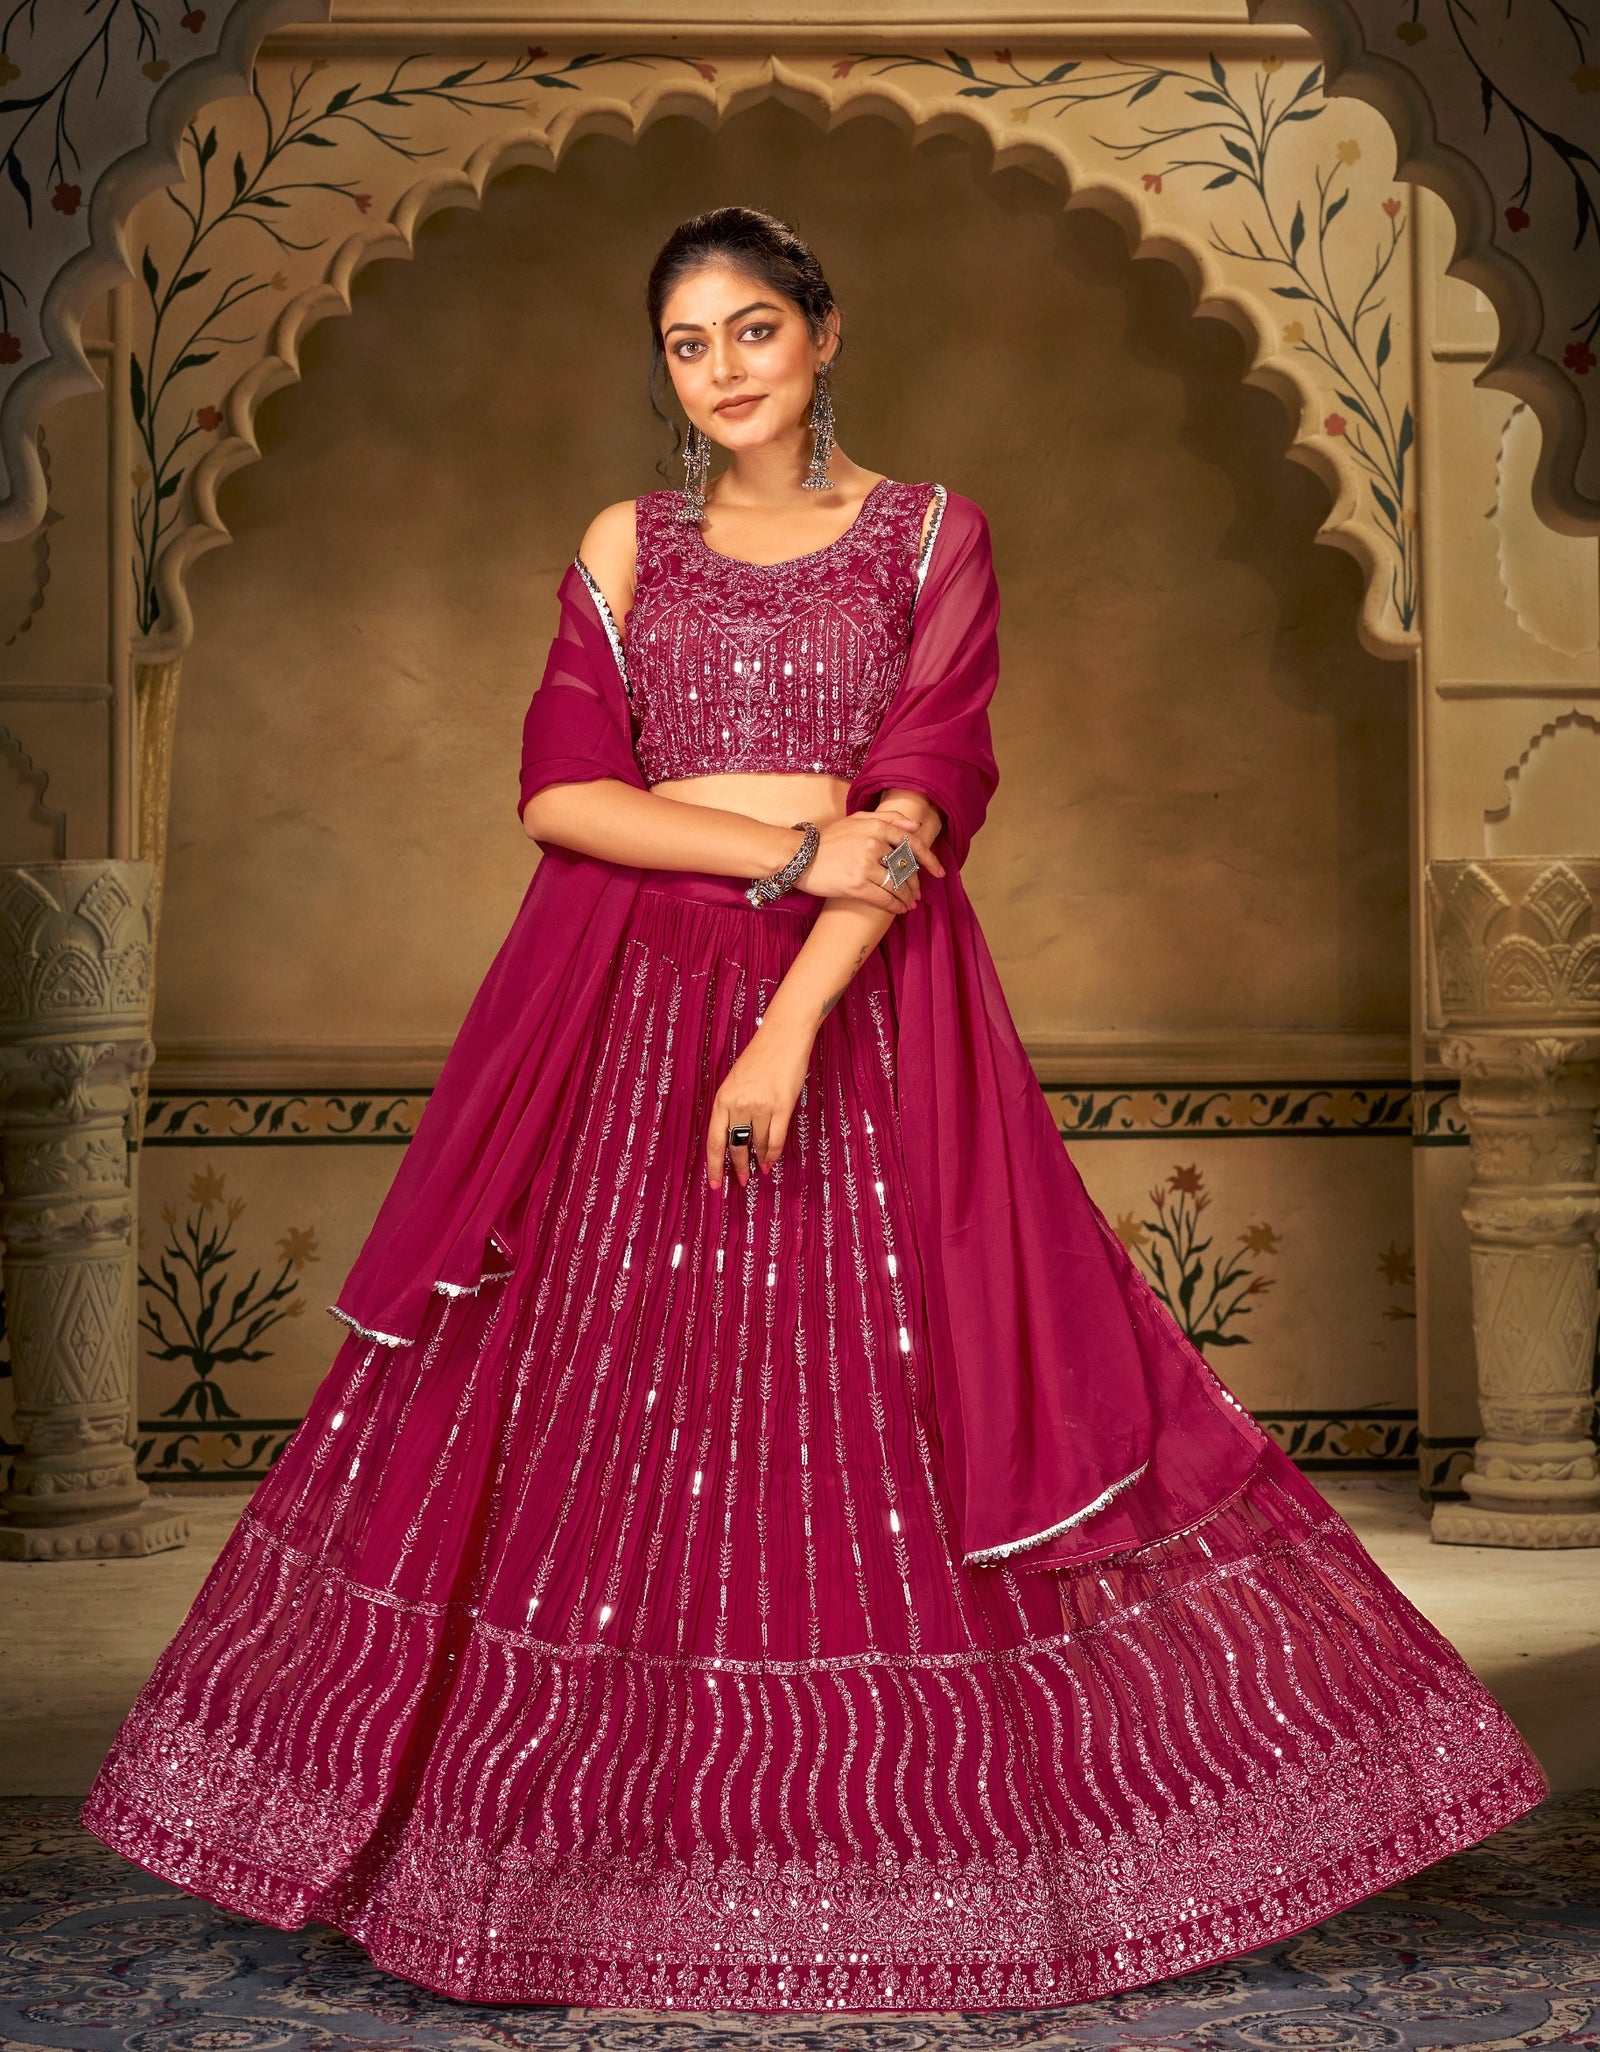 22 Latest Lehenga Blouse Designs For Women To Try In 2024 | Latest lehenga  blouse designs, Lehenga blouse designs, Blouse designs